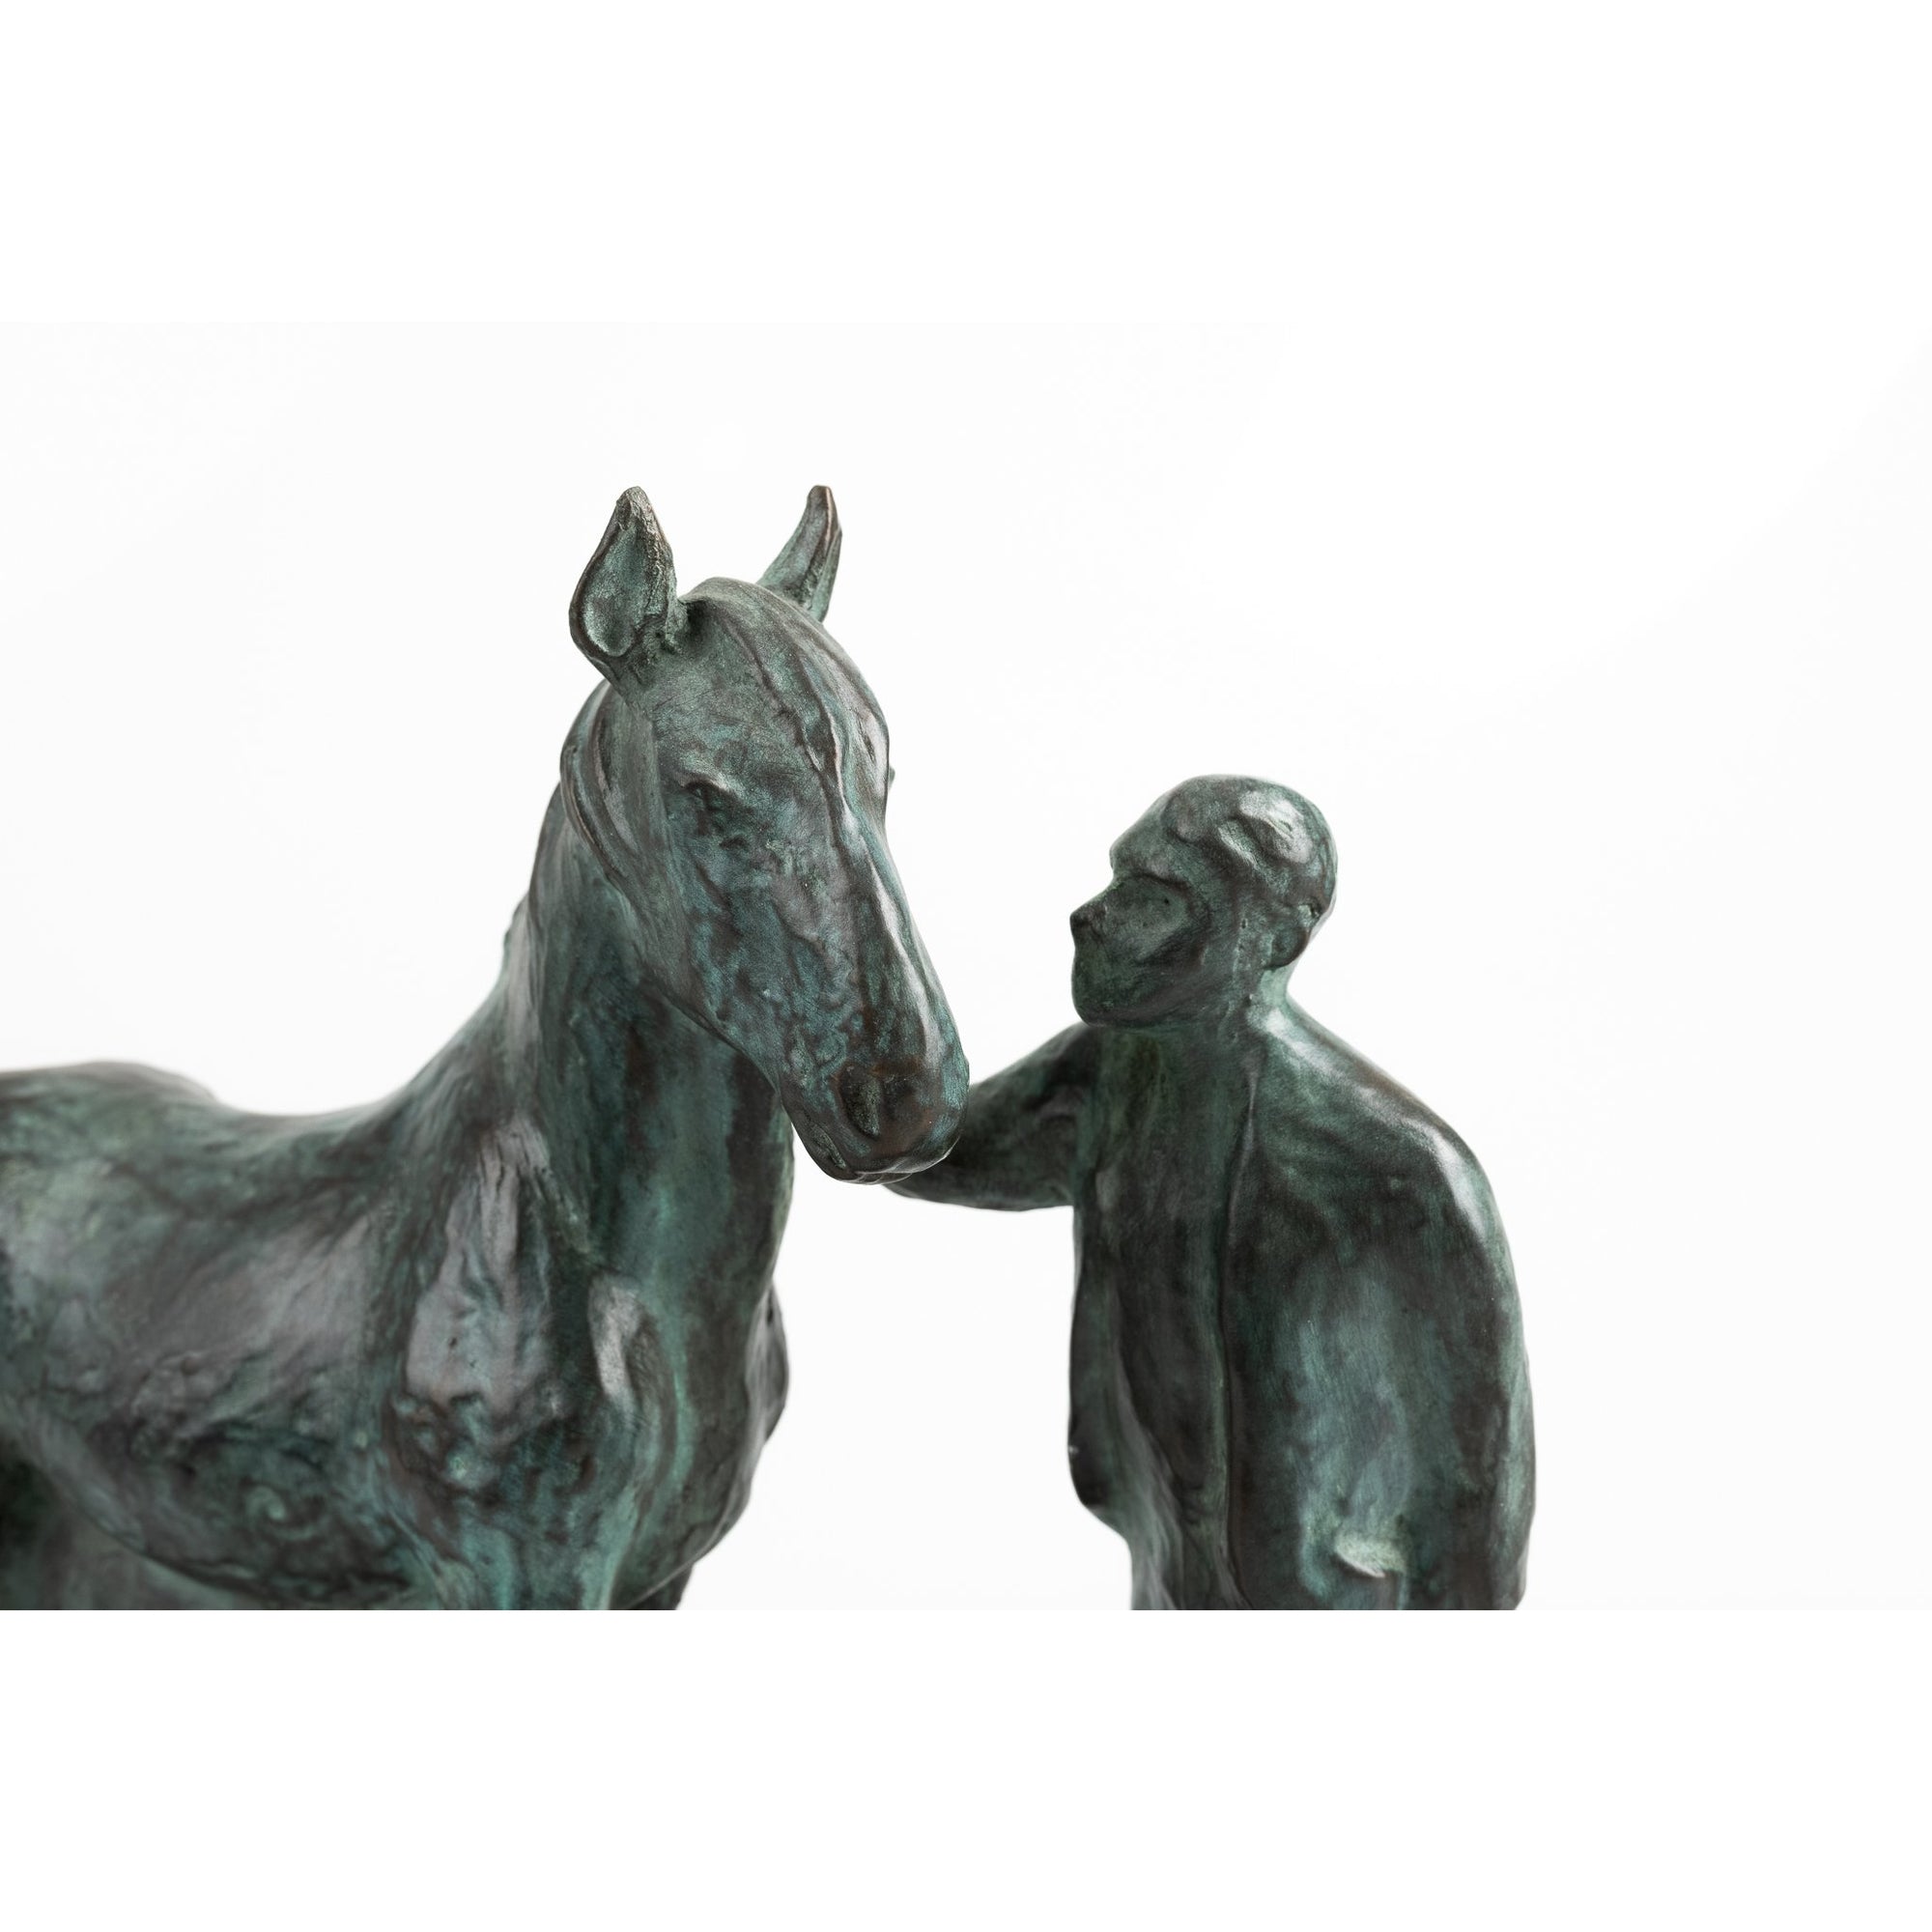 'Meeting' limited edition sculpture by Sophie Howard, available at Padstow Gallery, Cornwall